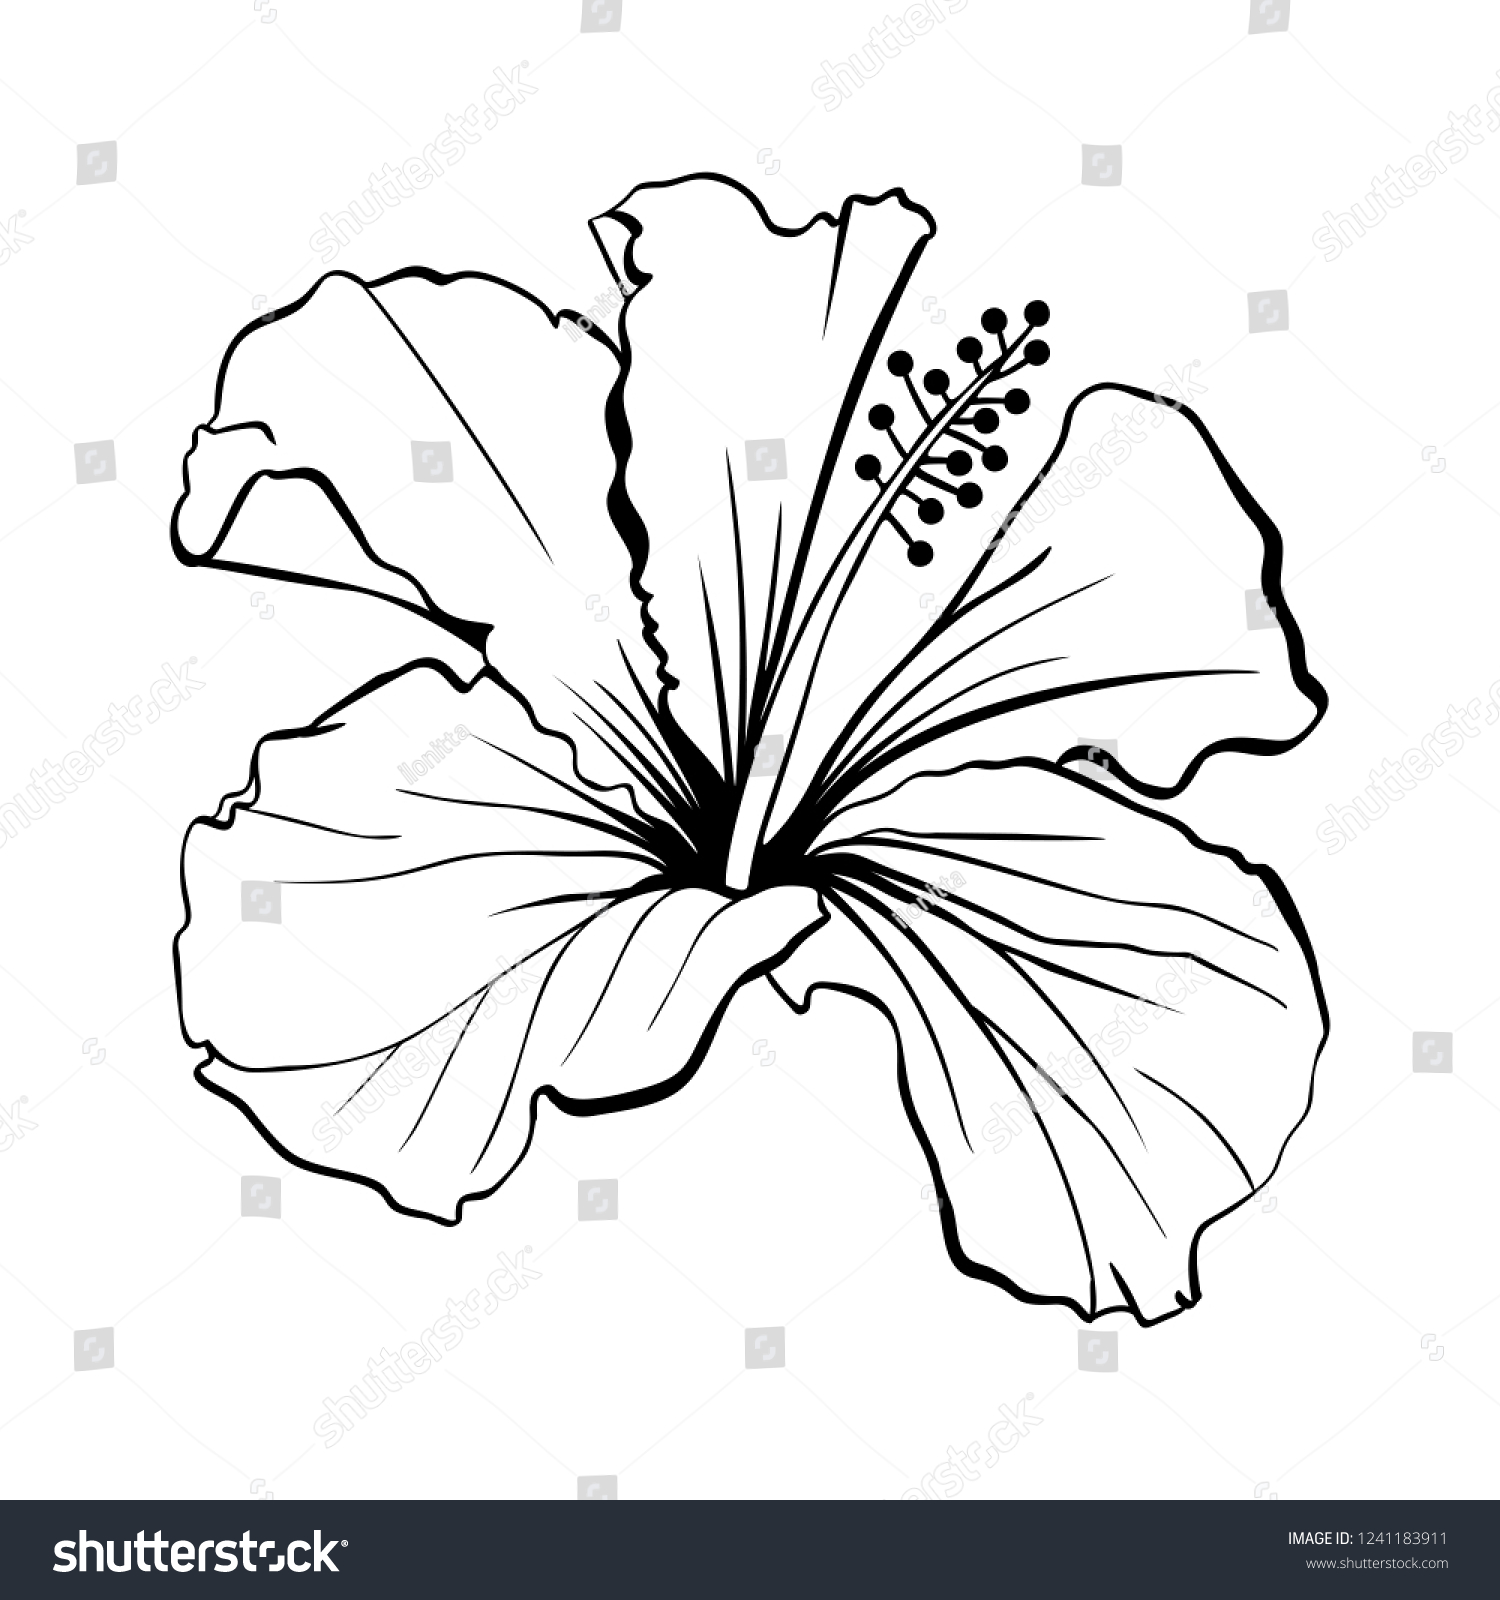 SVG of Hawaiian Hibiscus Laser Cut Vector. Fragrance Outline Flower. Mallow Chenese Rose. Black and White Flora. Isolated Botany Plant with Petals. Tropical Karkade or Bissap Herbal Tea, Crimson Blossom svg